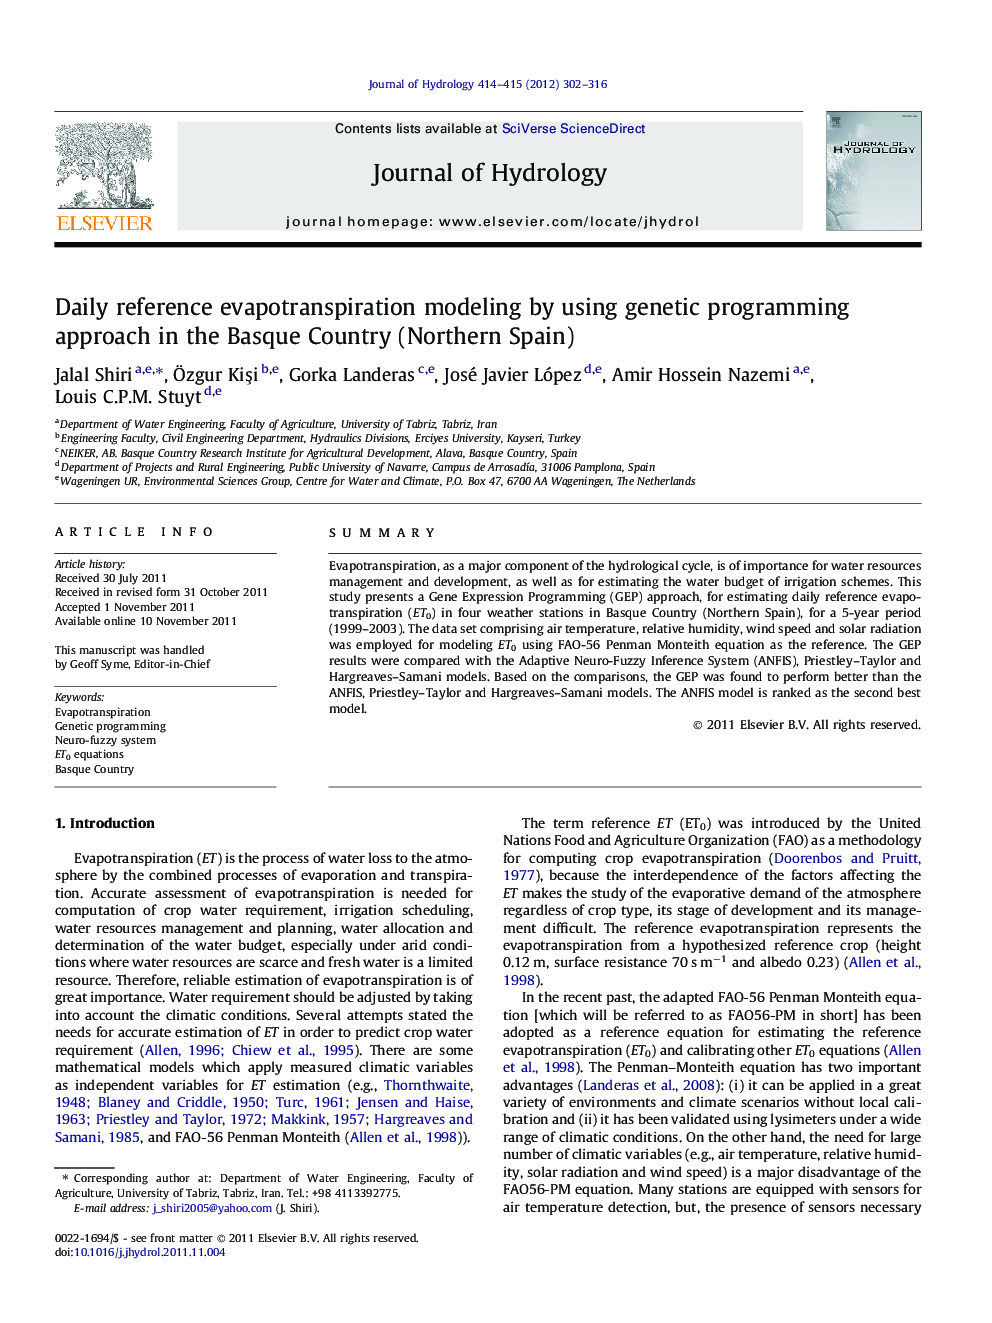 Daily reference evapotranspiration modeling by using genetic programming approach in the Basque Country (Northern Spain)